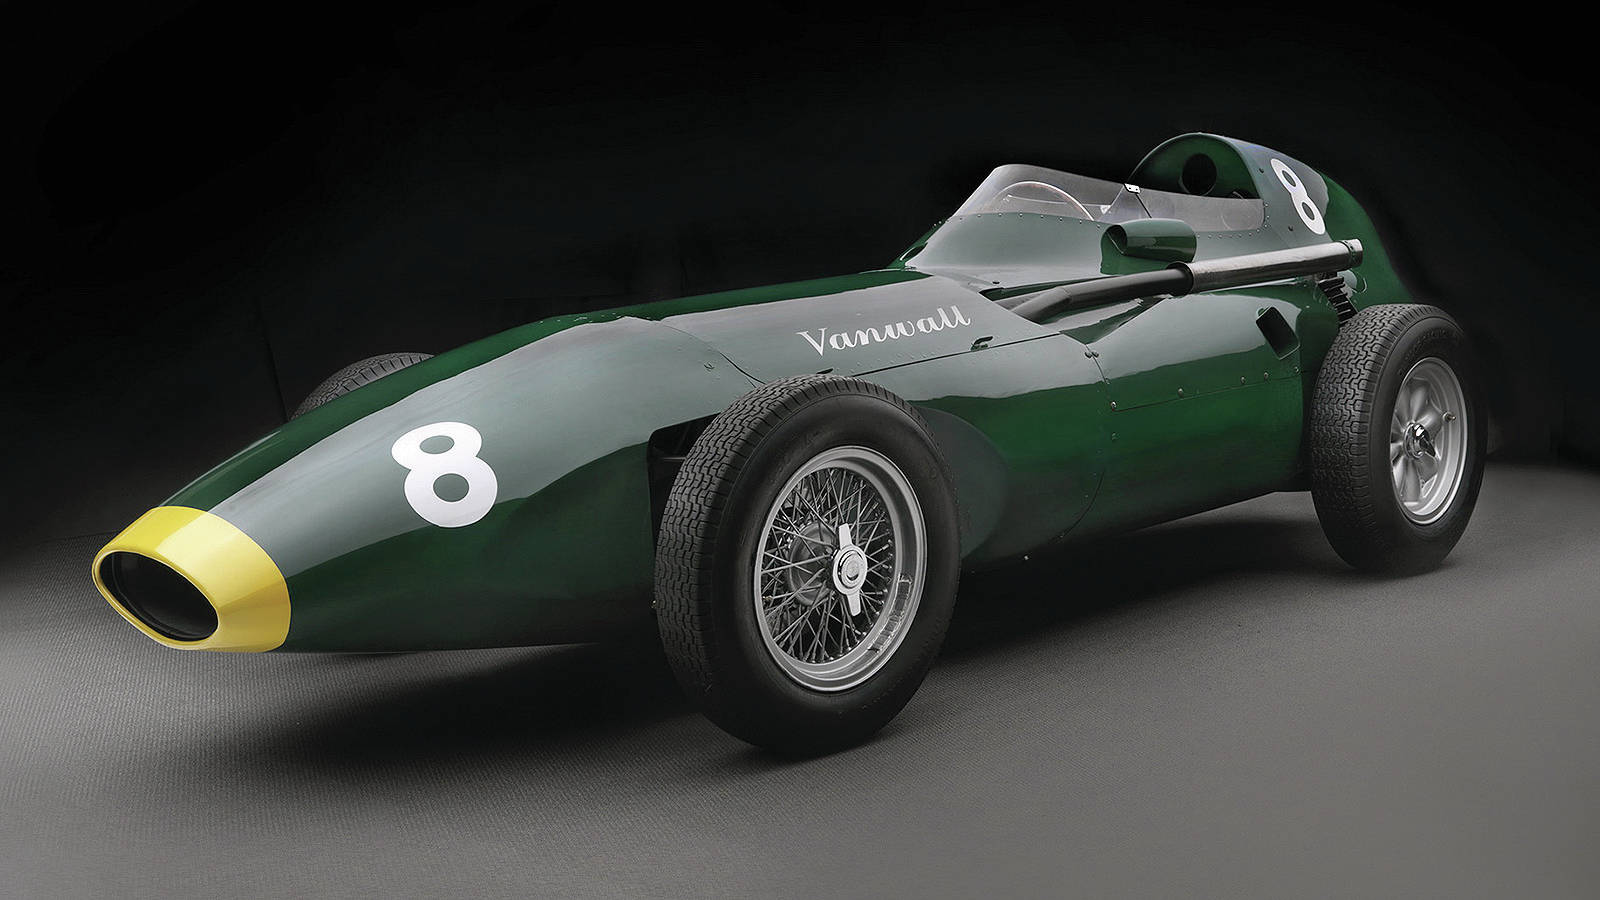 A British company will replicate six Vanwall Formula One cars from the 1950s. PHOTO: VANWALL